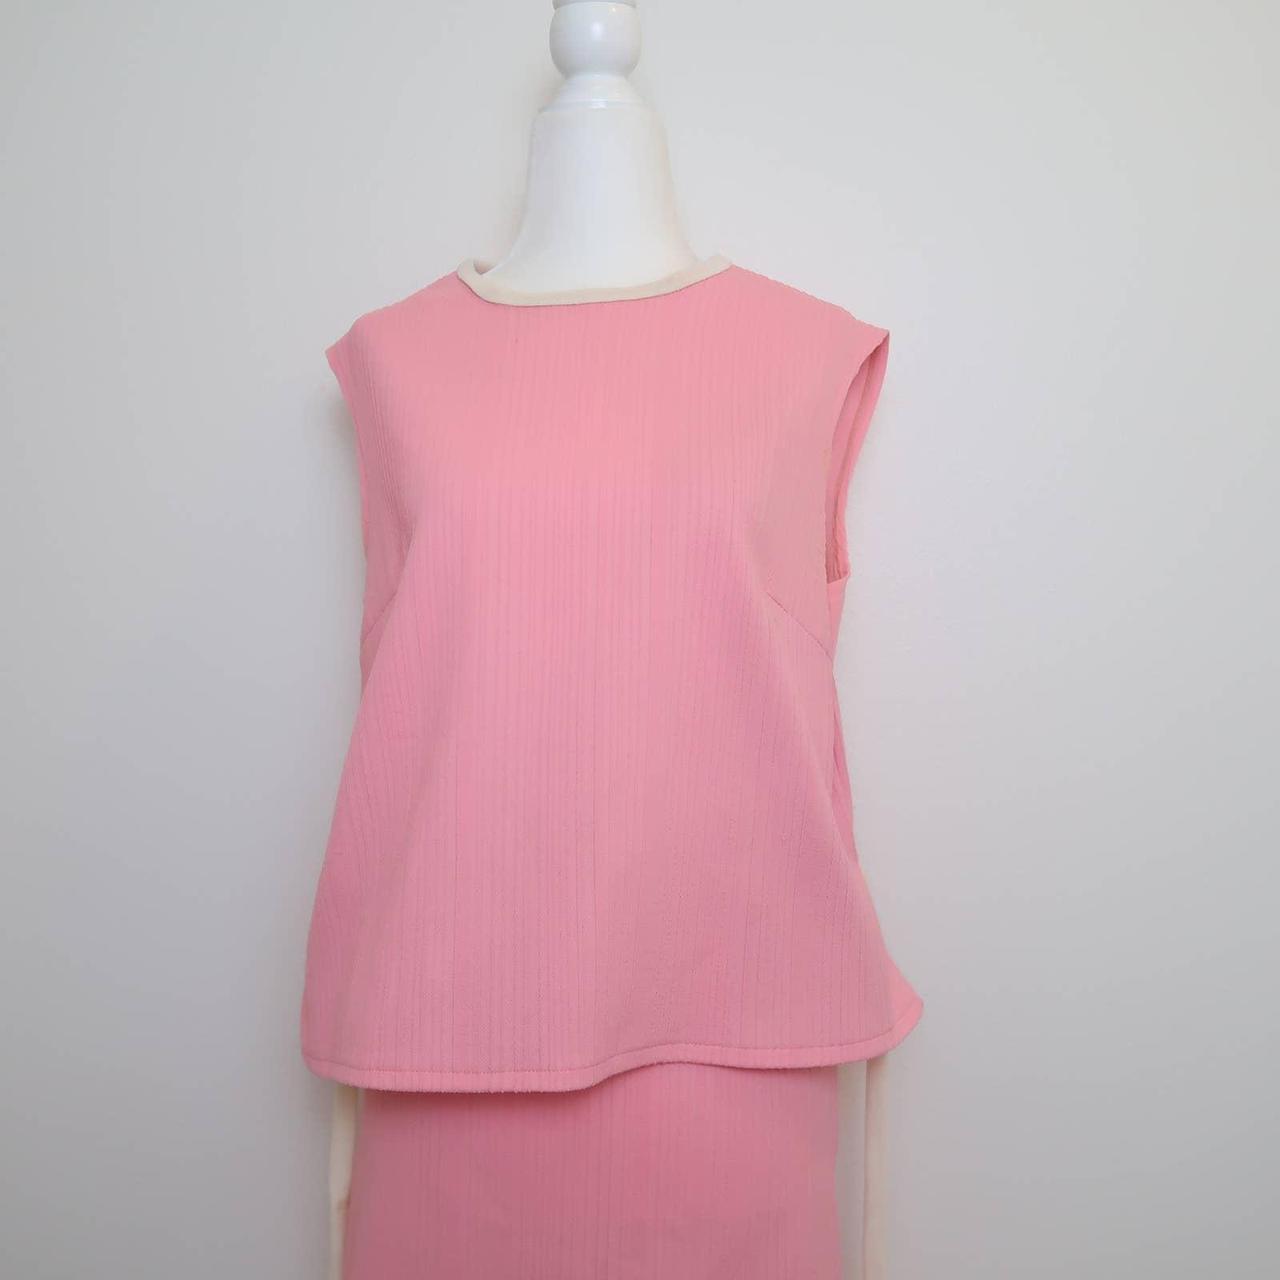 Product Image 4 - Vintage 60s bubblegum pink and